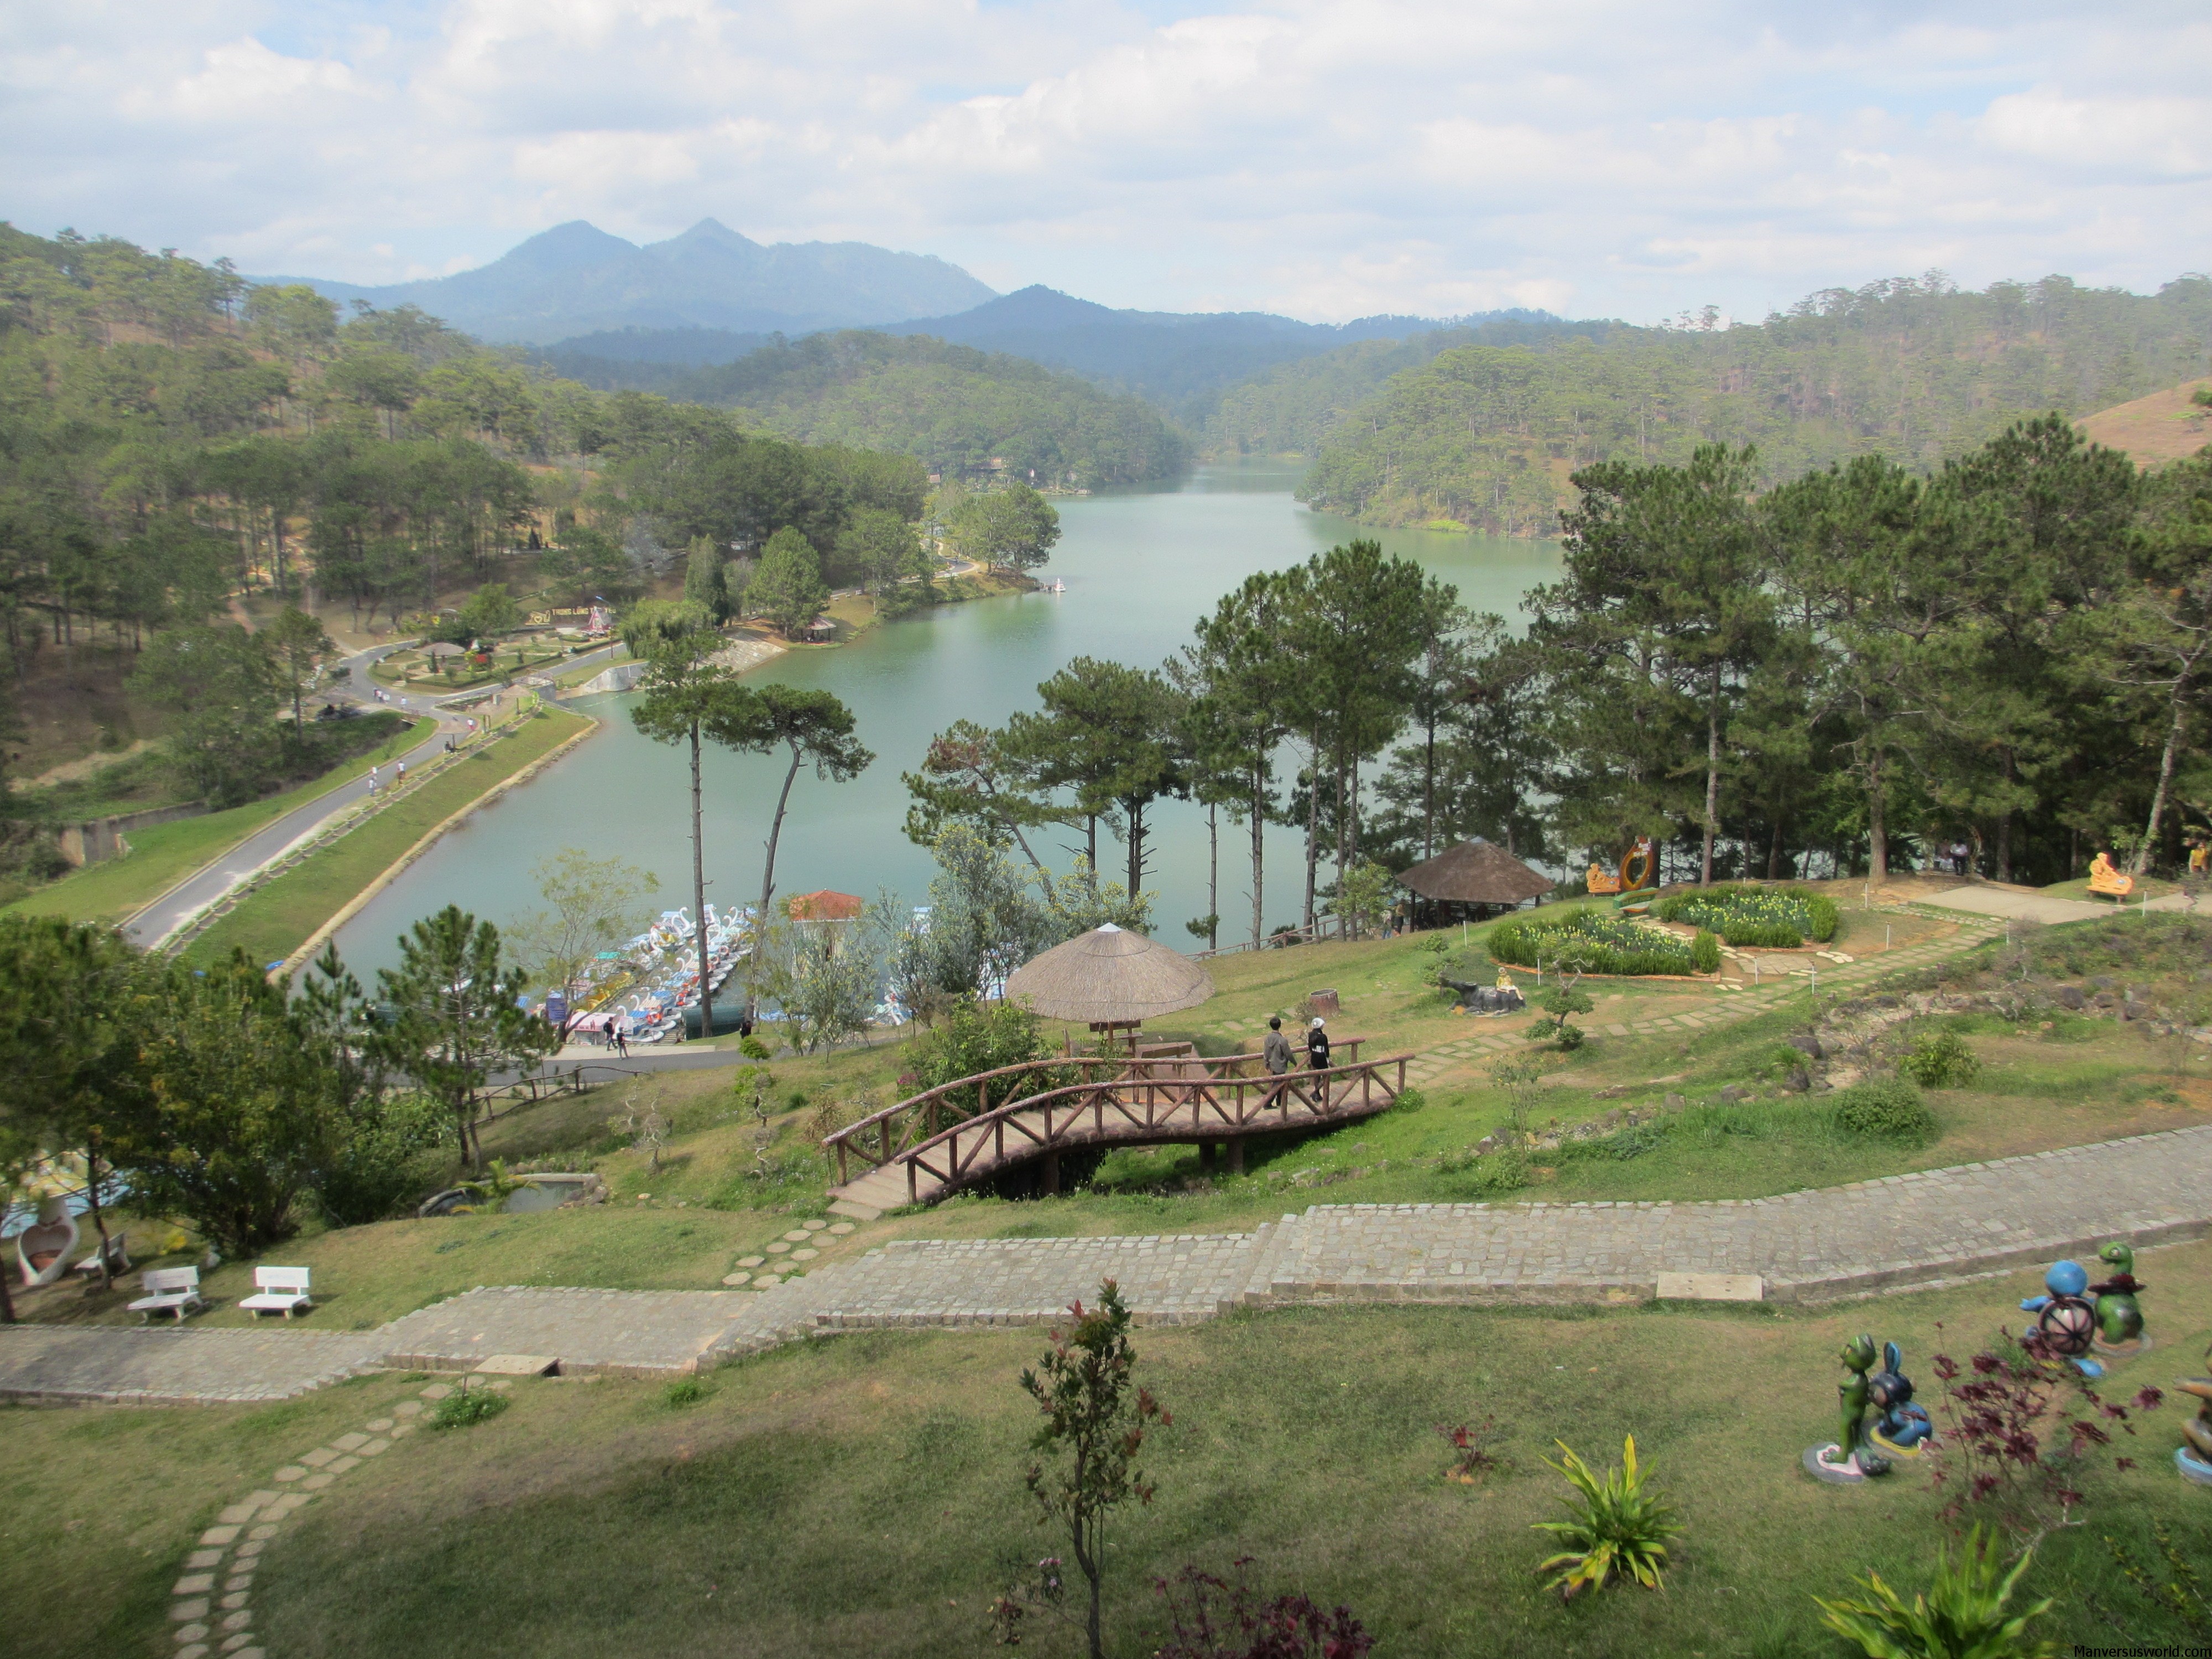 The view from Dalat's Valley of Love, Vietnam